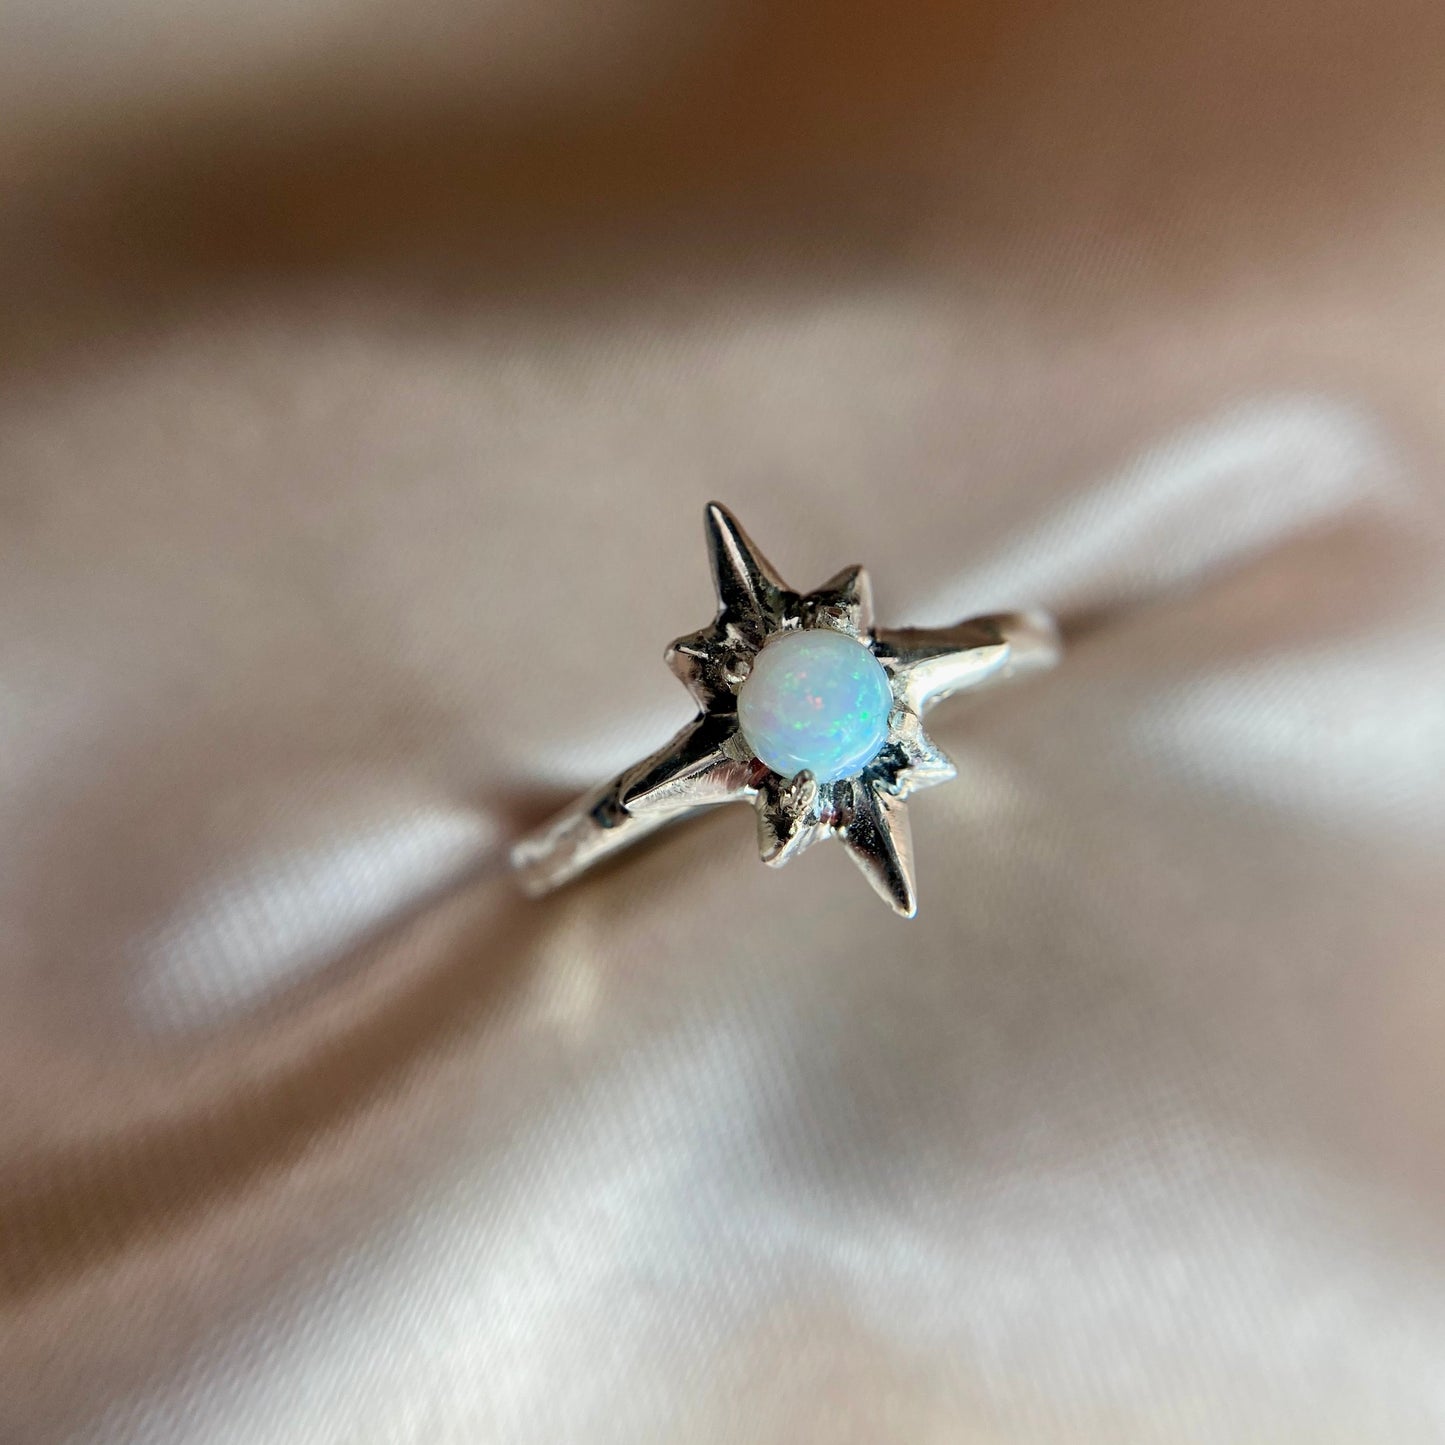 Polaris north star ring set with a tiny lab grown opal in sterling silver handmade by Iron Oxide Designs